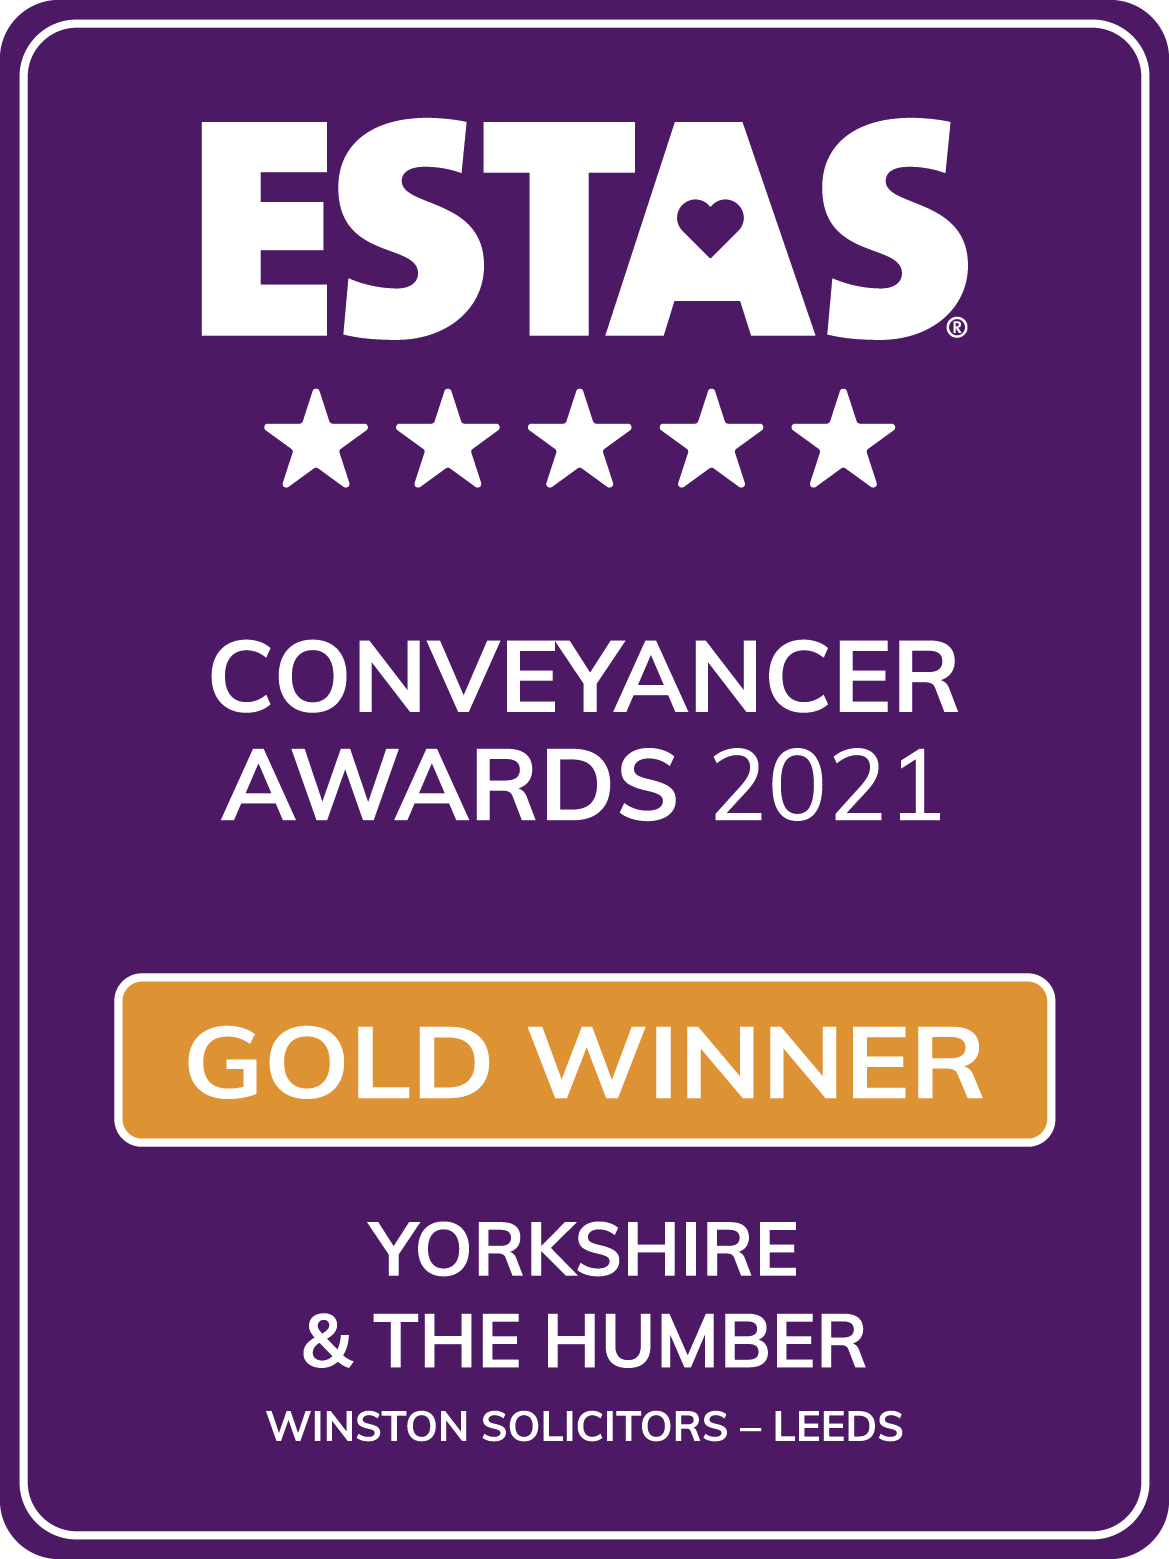 The ESTAS 2021 Gold Winner Yorkshire and the Humber Winston Solicitors